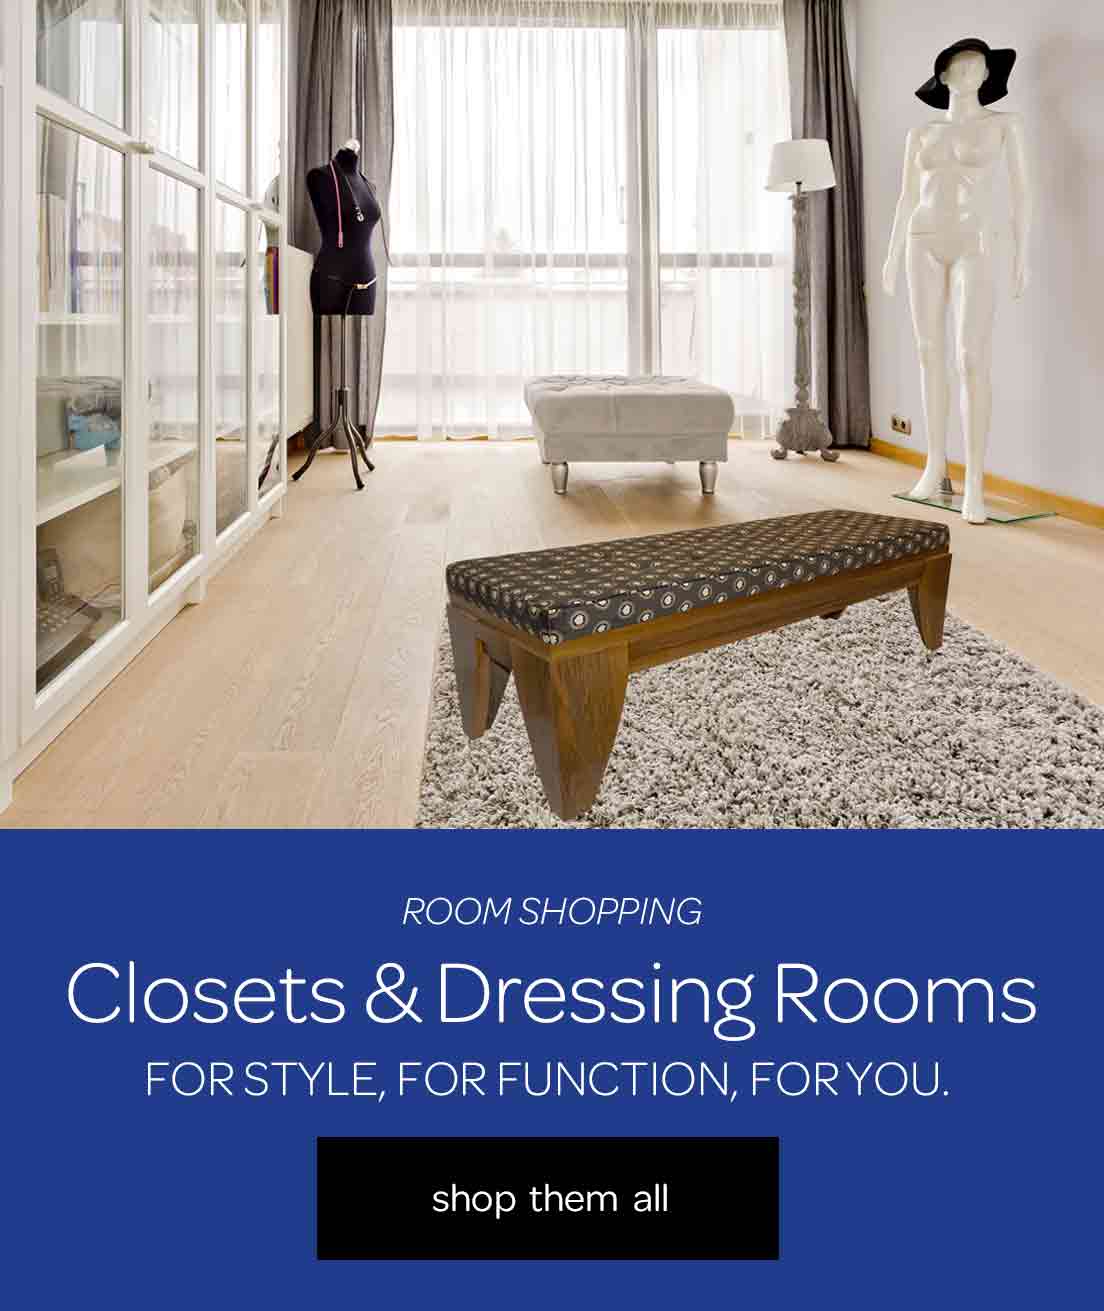 Room Shopping - Closets & Dressing Rooms - For style, for function, for you. - Shop them all.